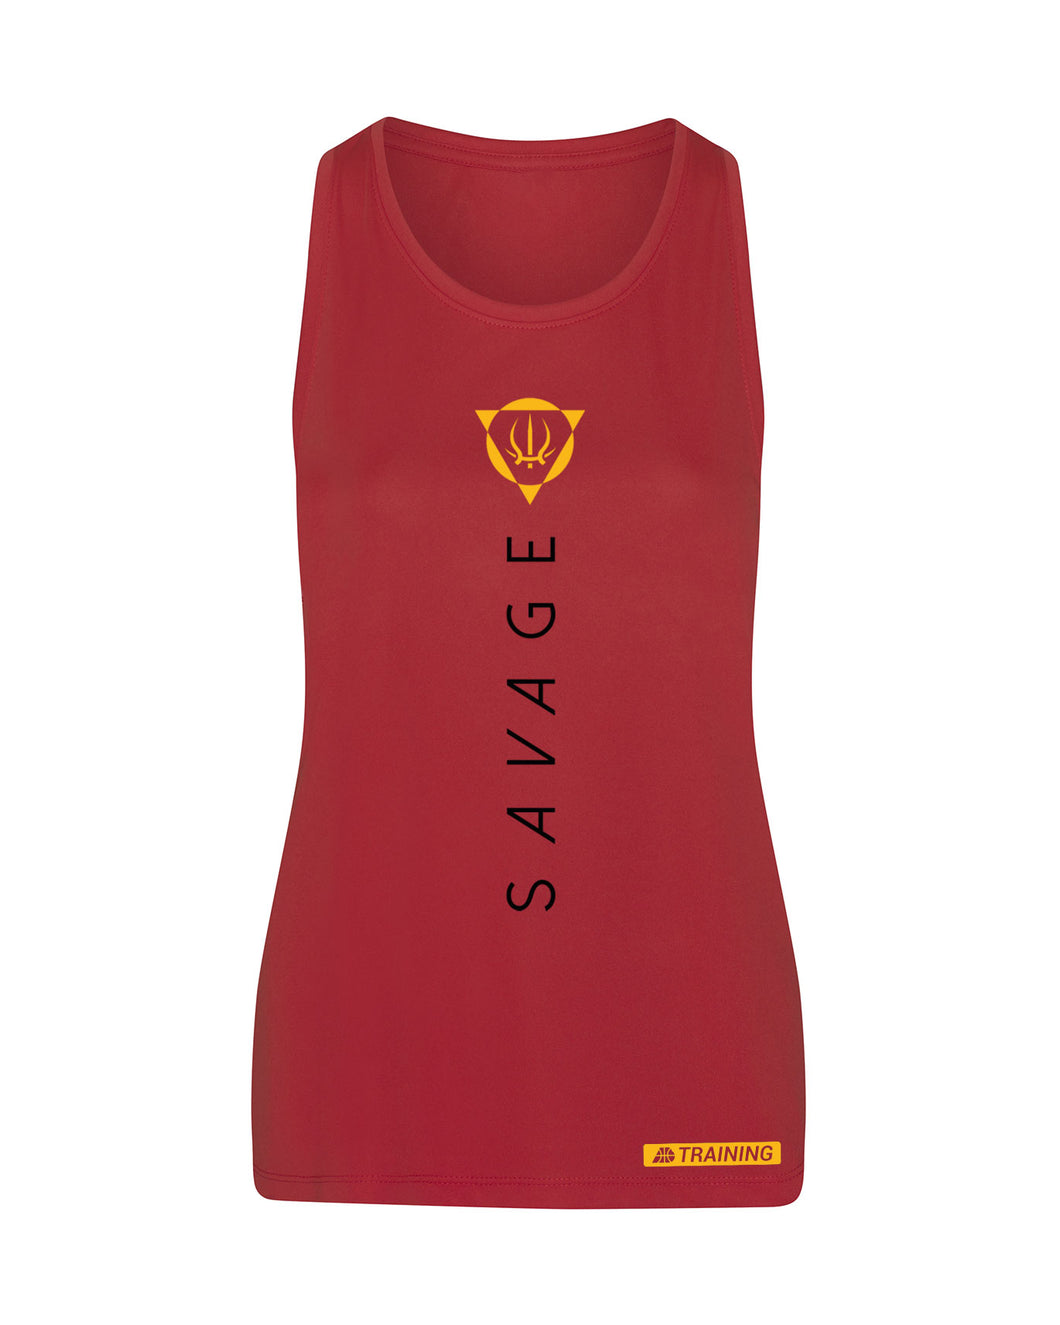 Savage Fire Red Womens Performance Vest